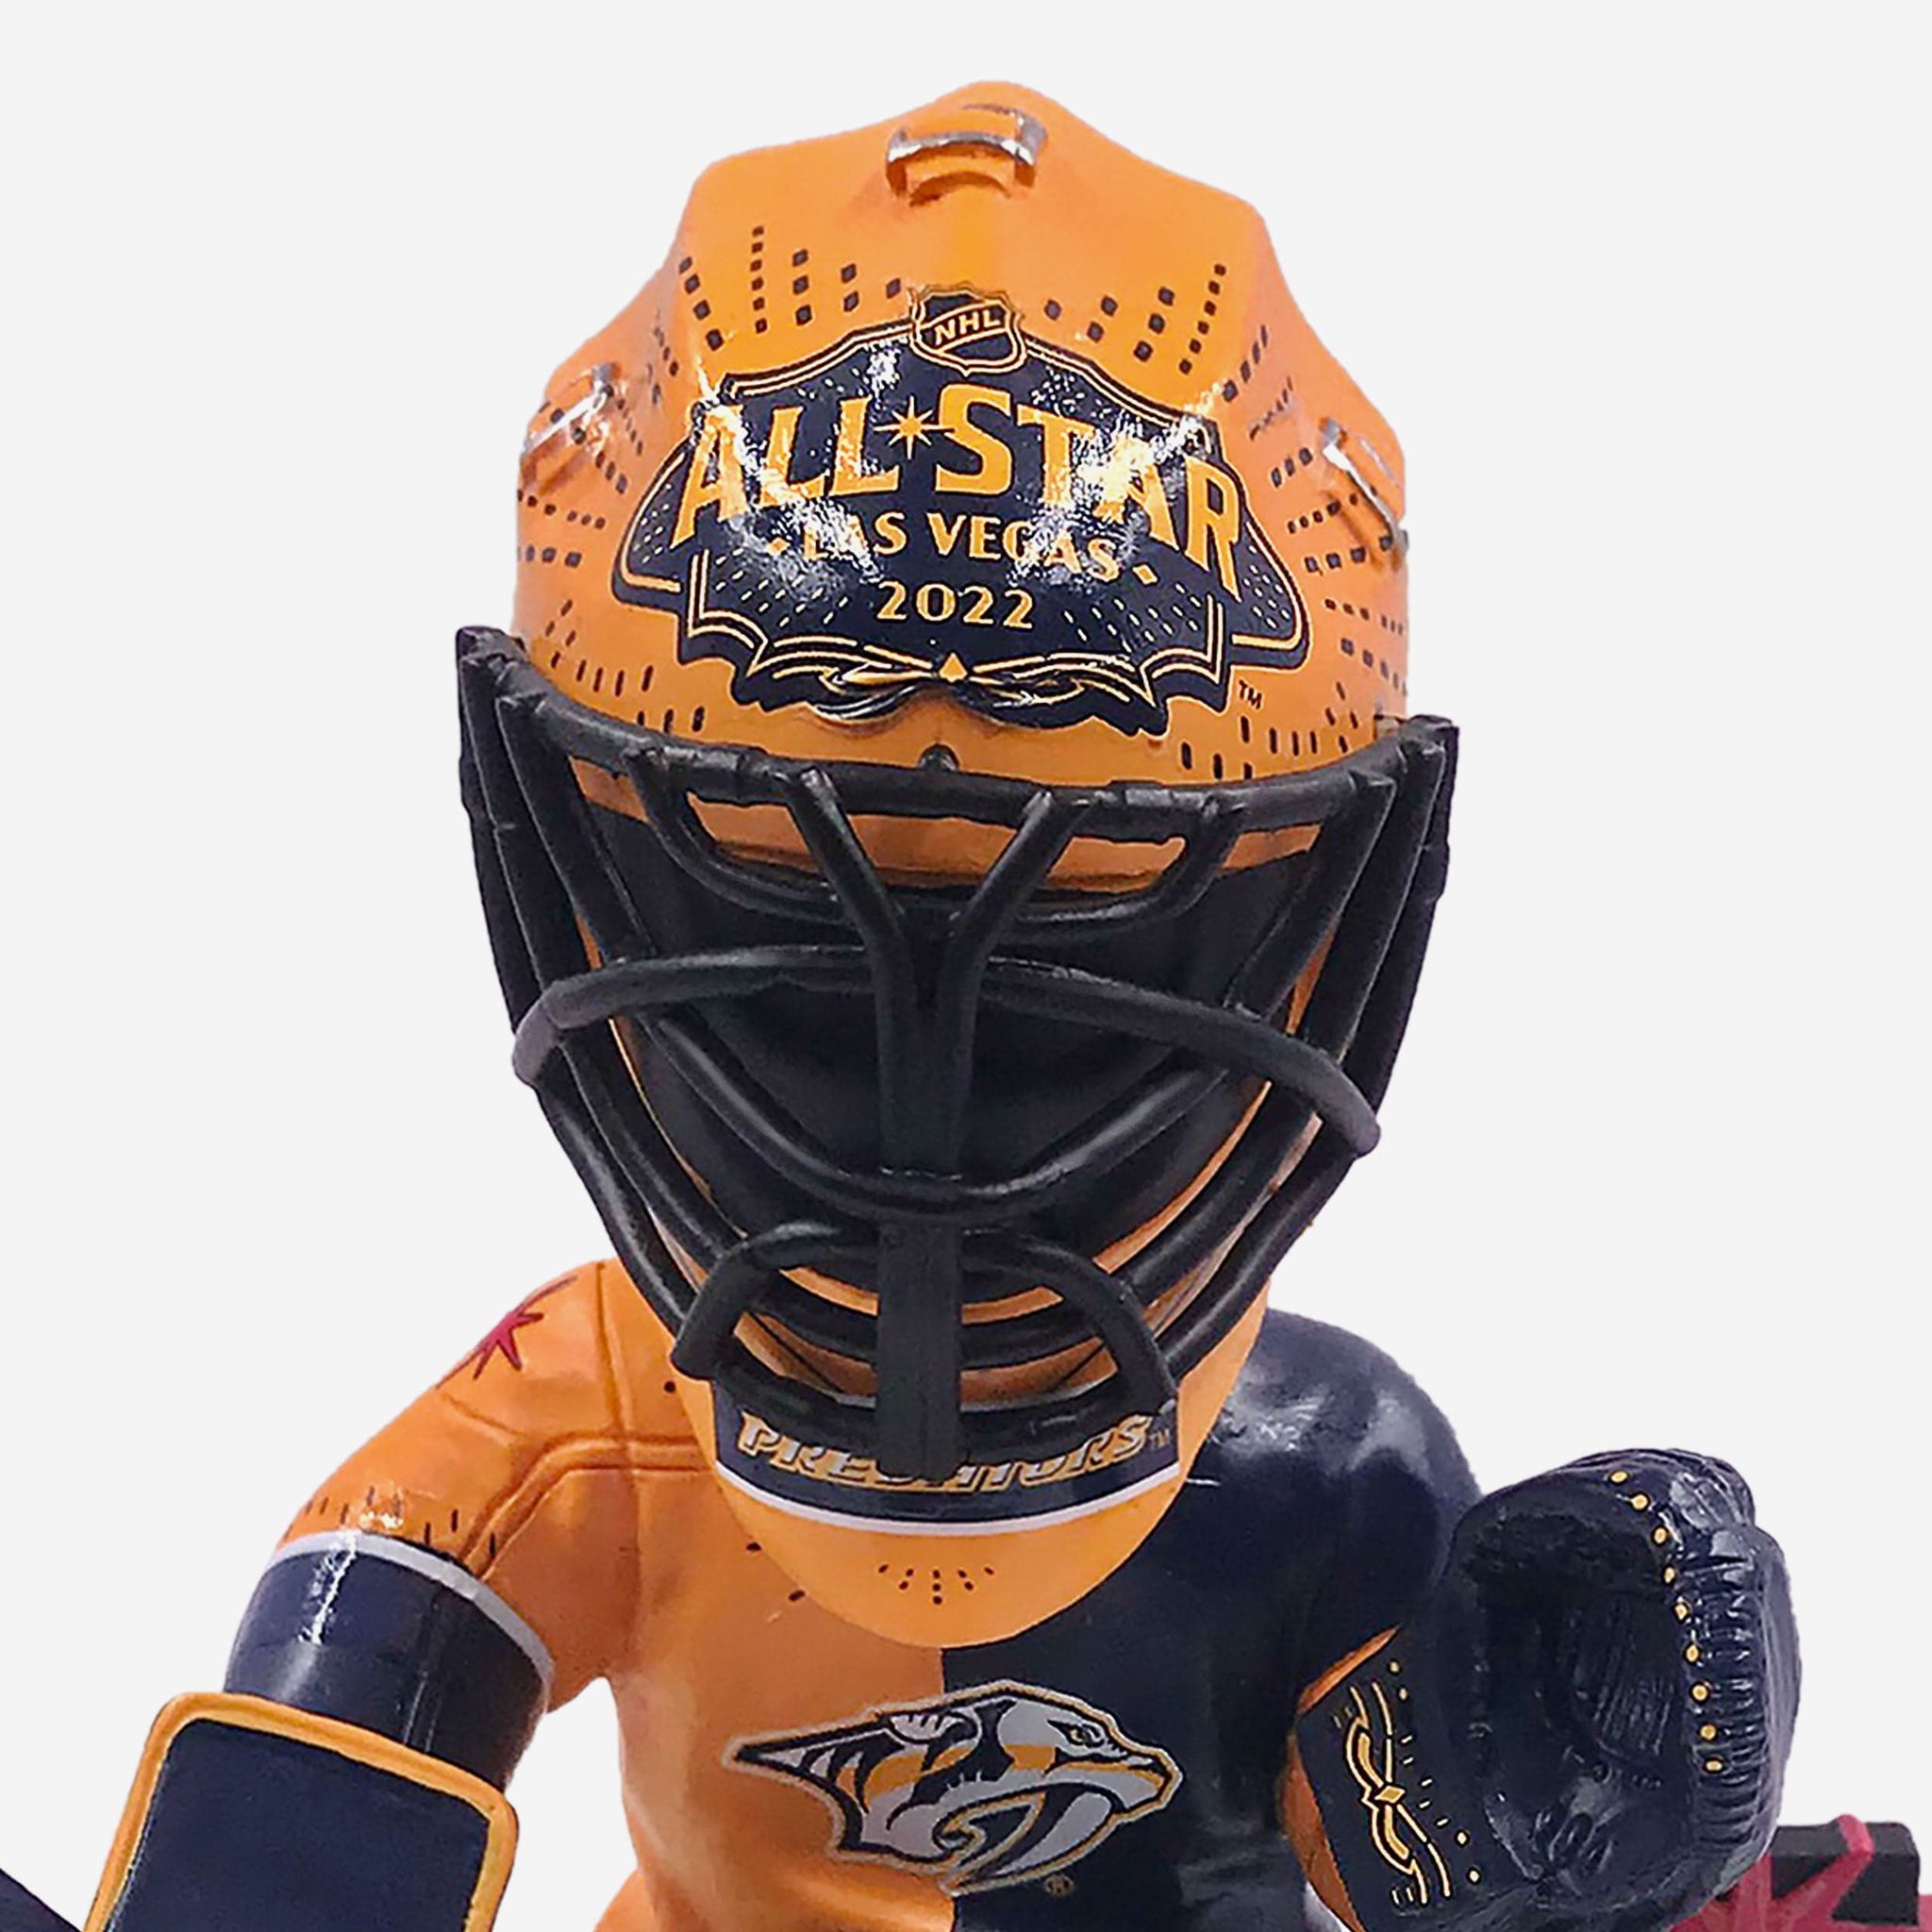 Nashville Predators: What to Watch for at 2022 NHL All-Star Weekend